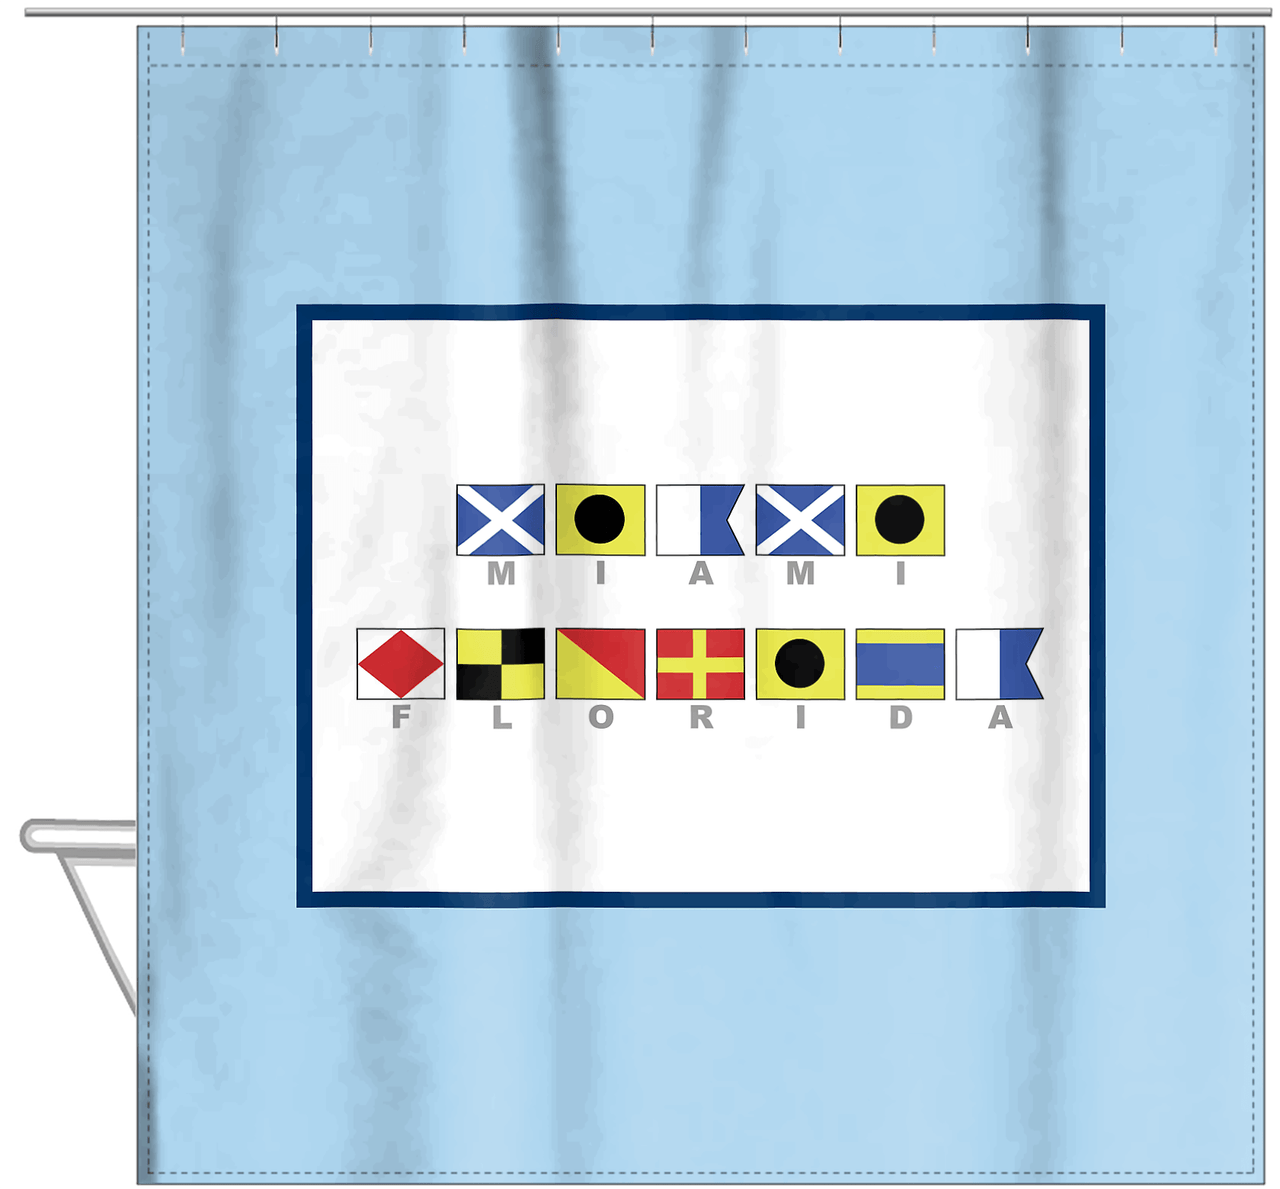 Personalized Nautical Flags Shower Curtain - Blue and Navy - Flags With Grey Letters - Hanging View